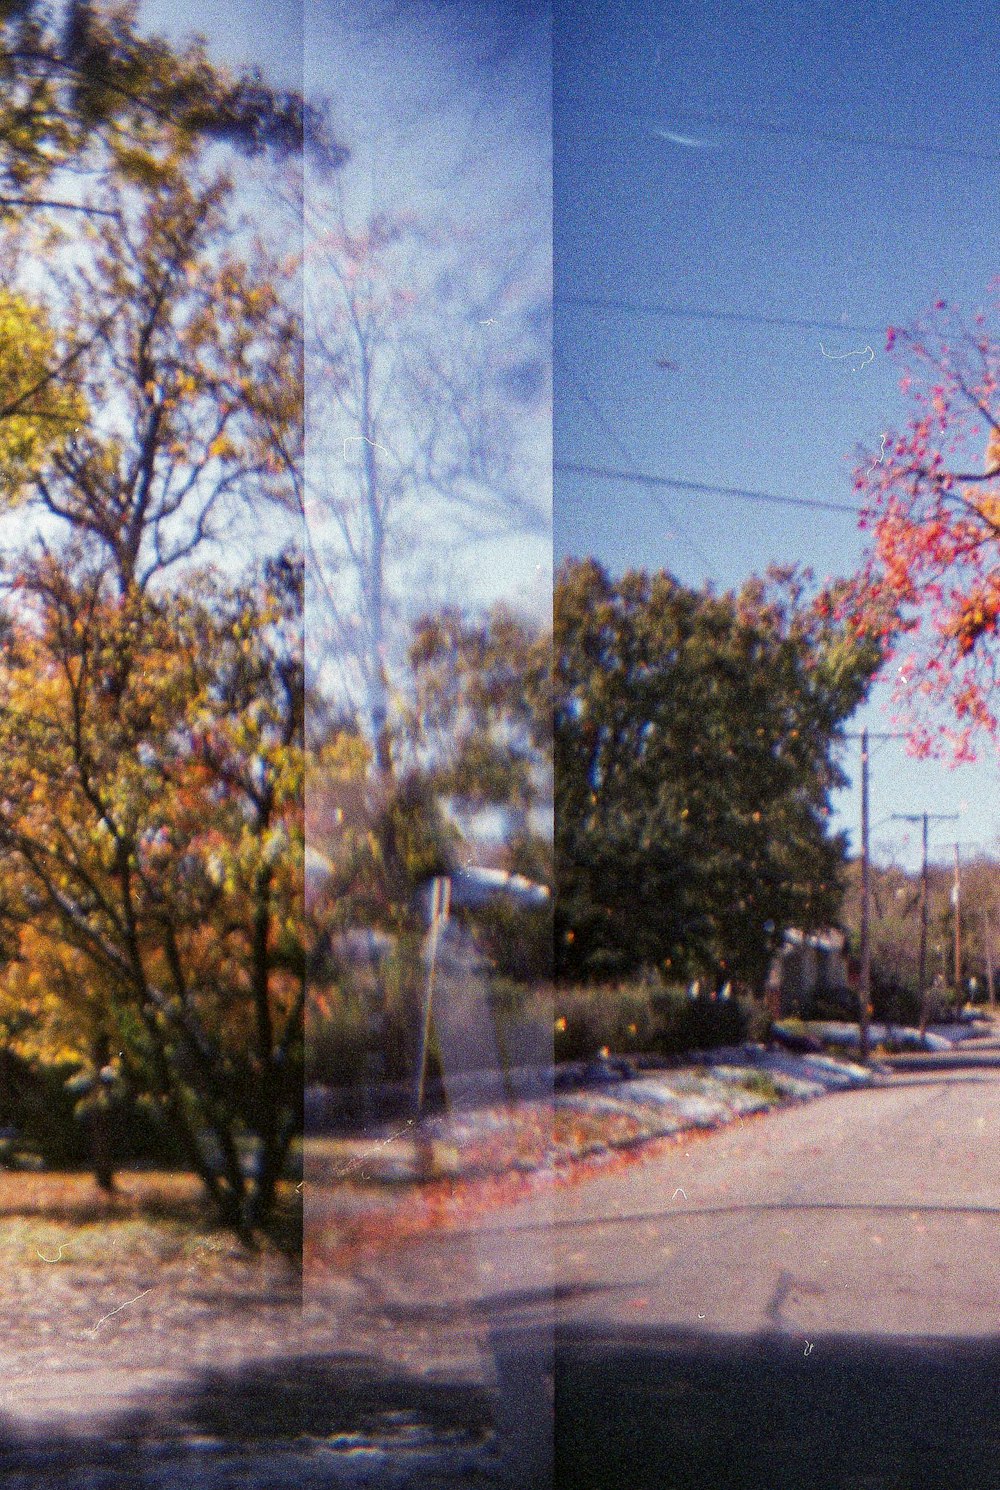 two pictures of a street with trees and a stop sign